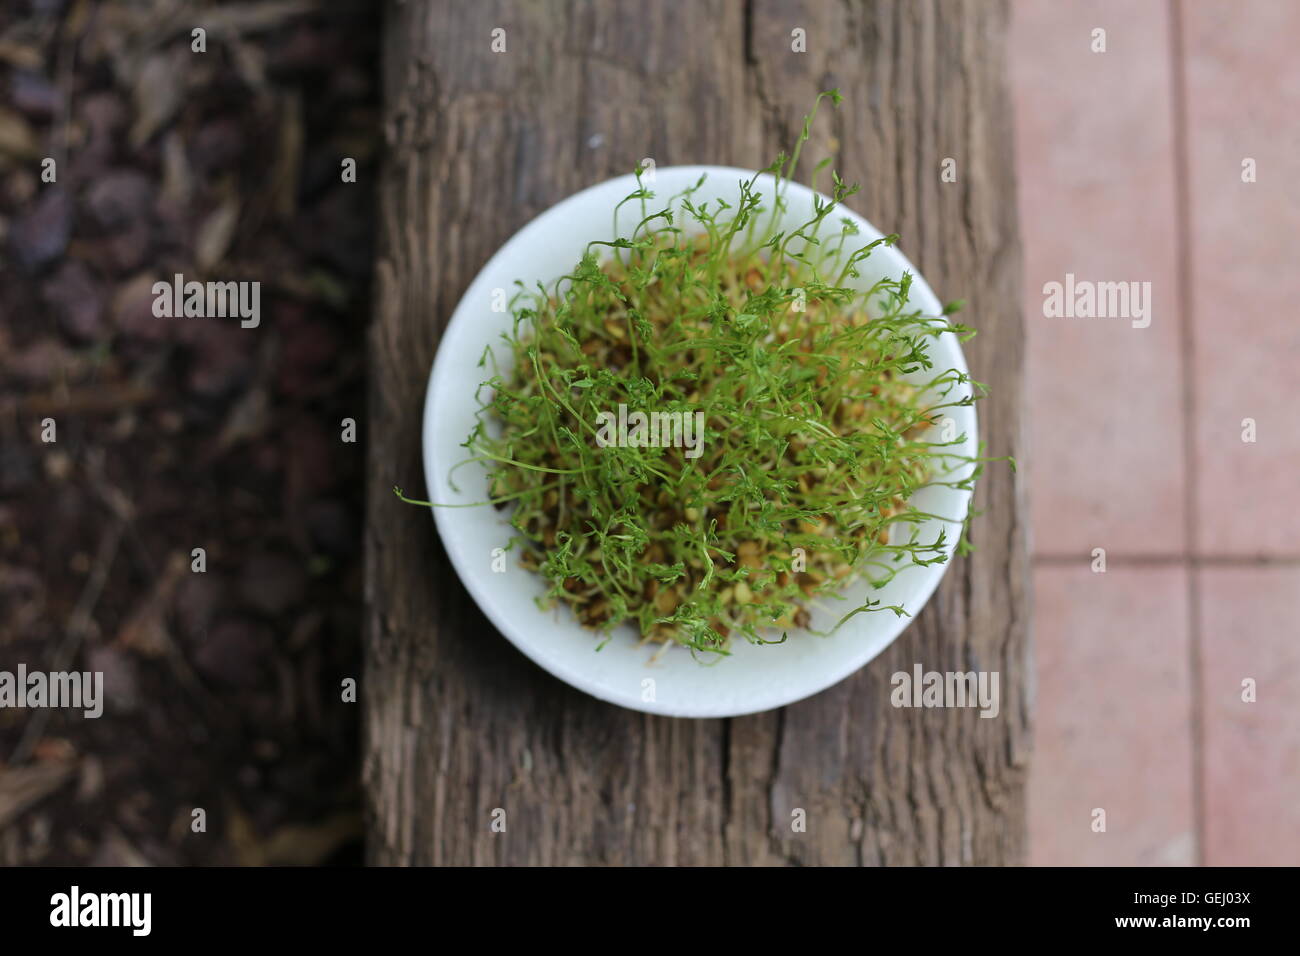 Lentils Sprouts.  Germinated lentils. Home made lentils sprouts in a white dish on wooden railway sleepers. Stock Photo